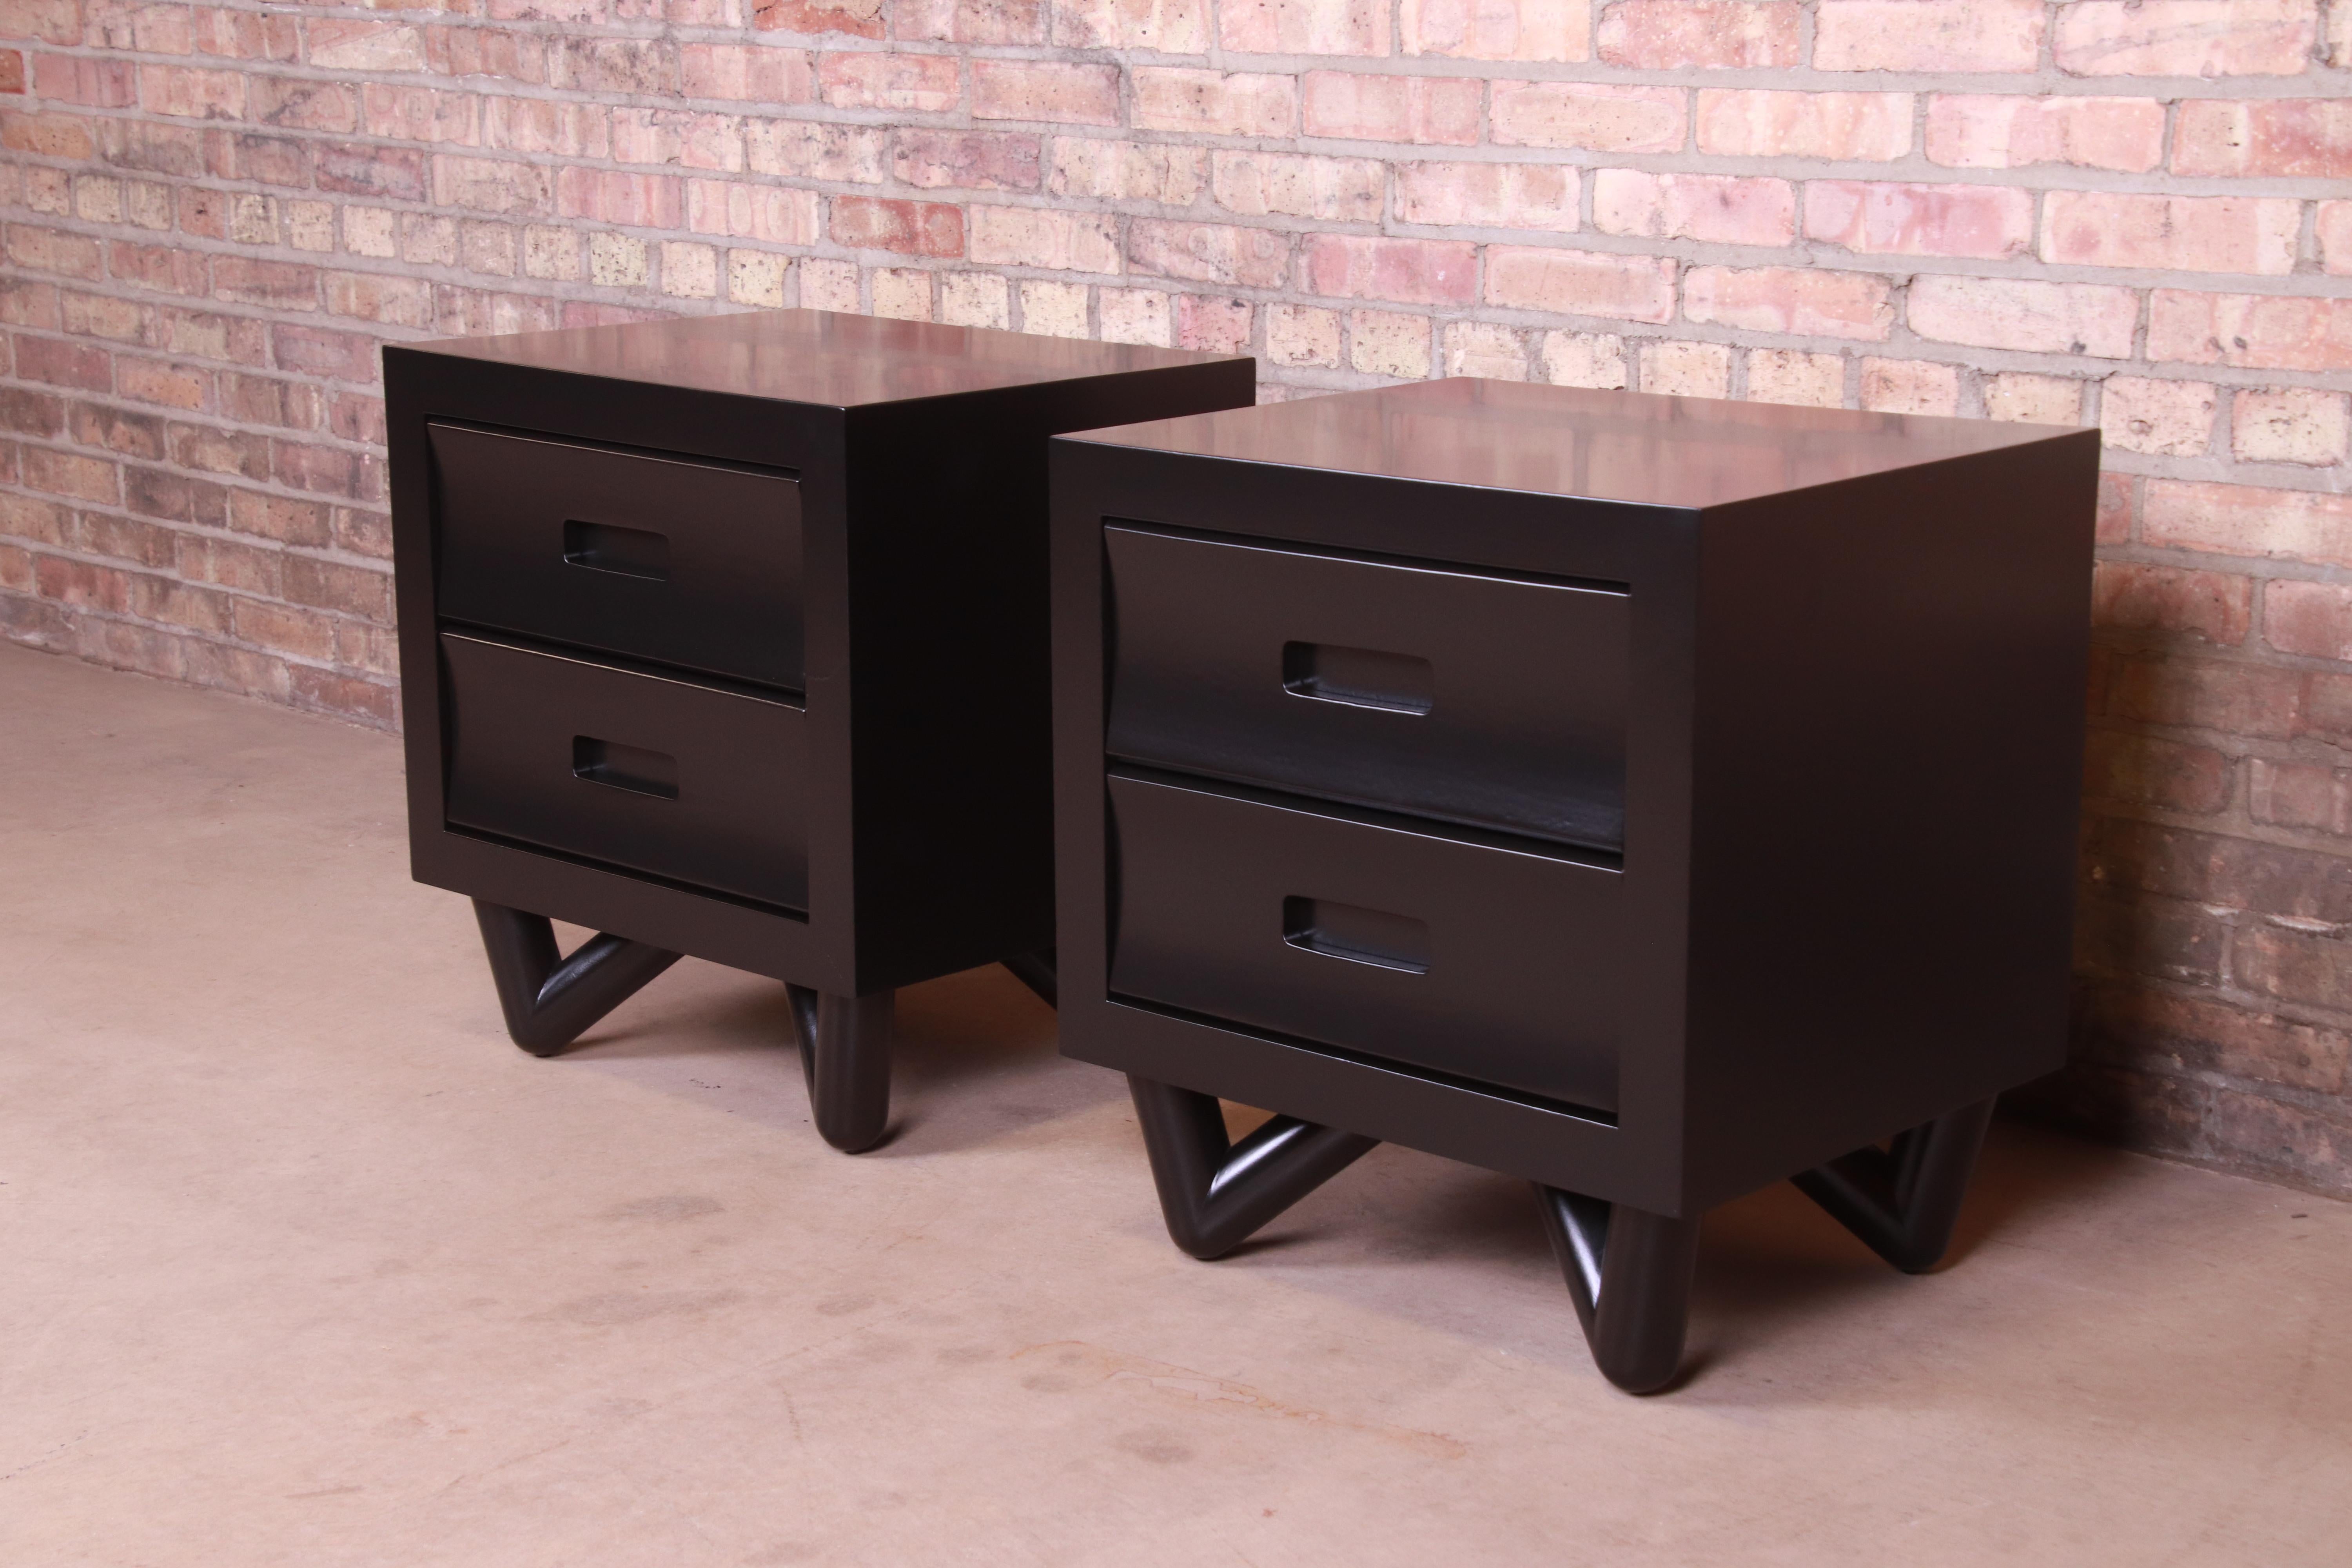 A gorgeous pair of Mid-Century Modern nightstands

USA, mid-20th century

Sculpted walnut, with black lacquered finish.

Measures: 22